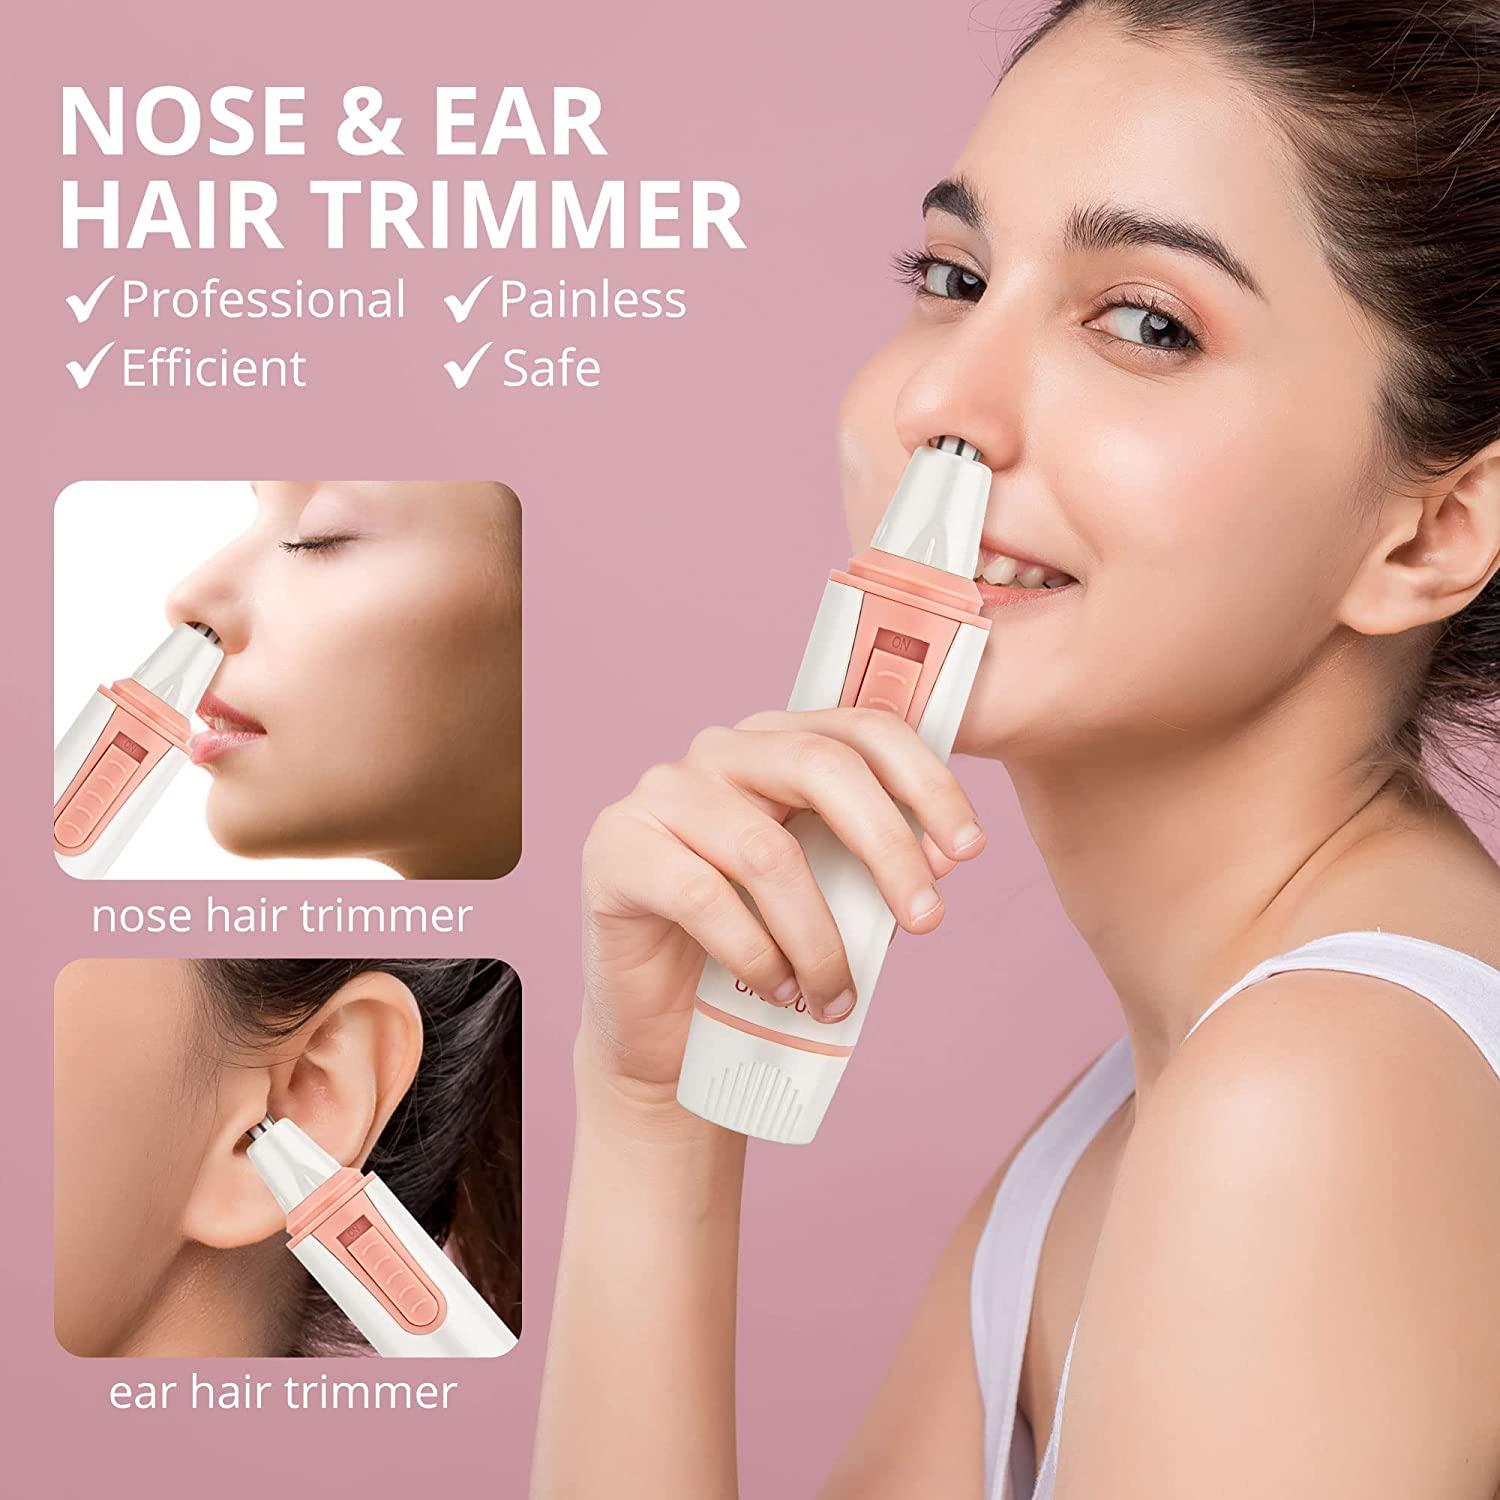 Nose Hair Trimmer for Women, Professional Painless Ear and Nose Trimmer for  Women, Battery-Powered Womens Nose Hair Trimmer, Precision Lady's Ear Hair  Trimmer with IPX5 Waterproof, Battery Included